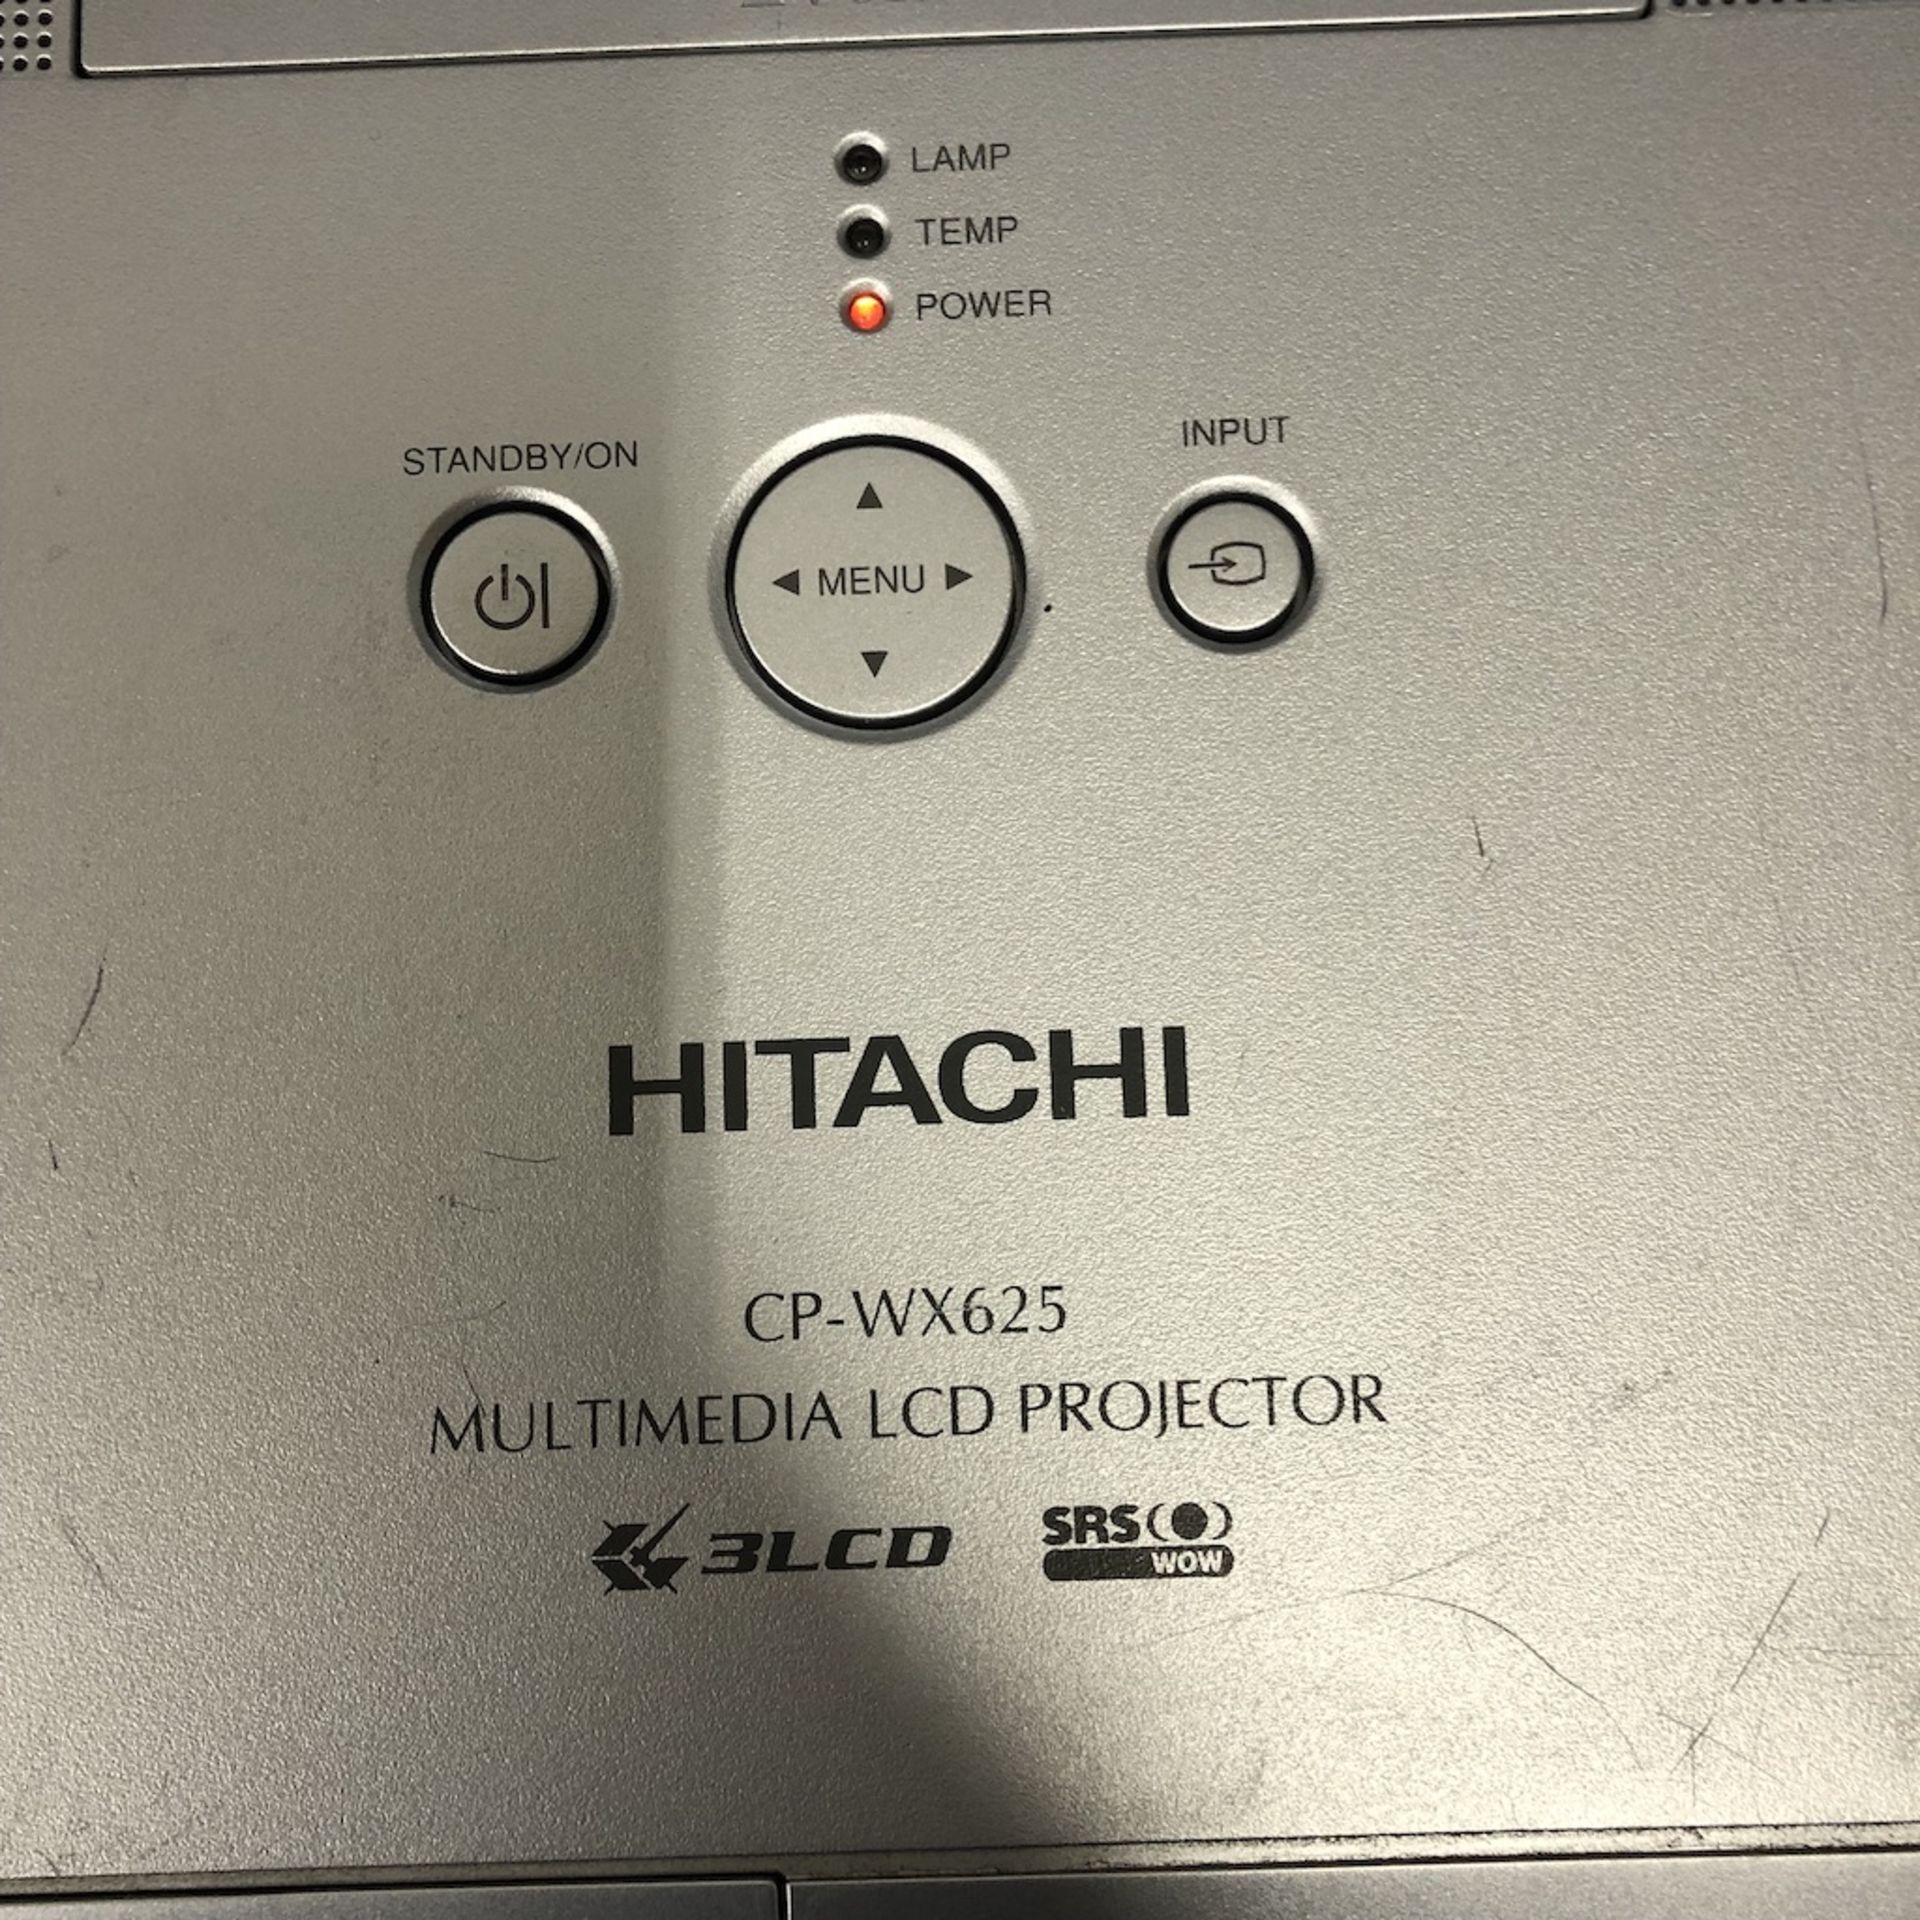 HITACHI CP-WX625 MULTIMEDIA LCD PROJECTOR - Image 6 of 11